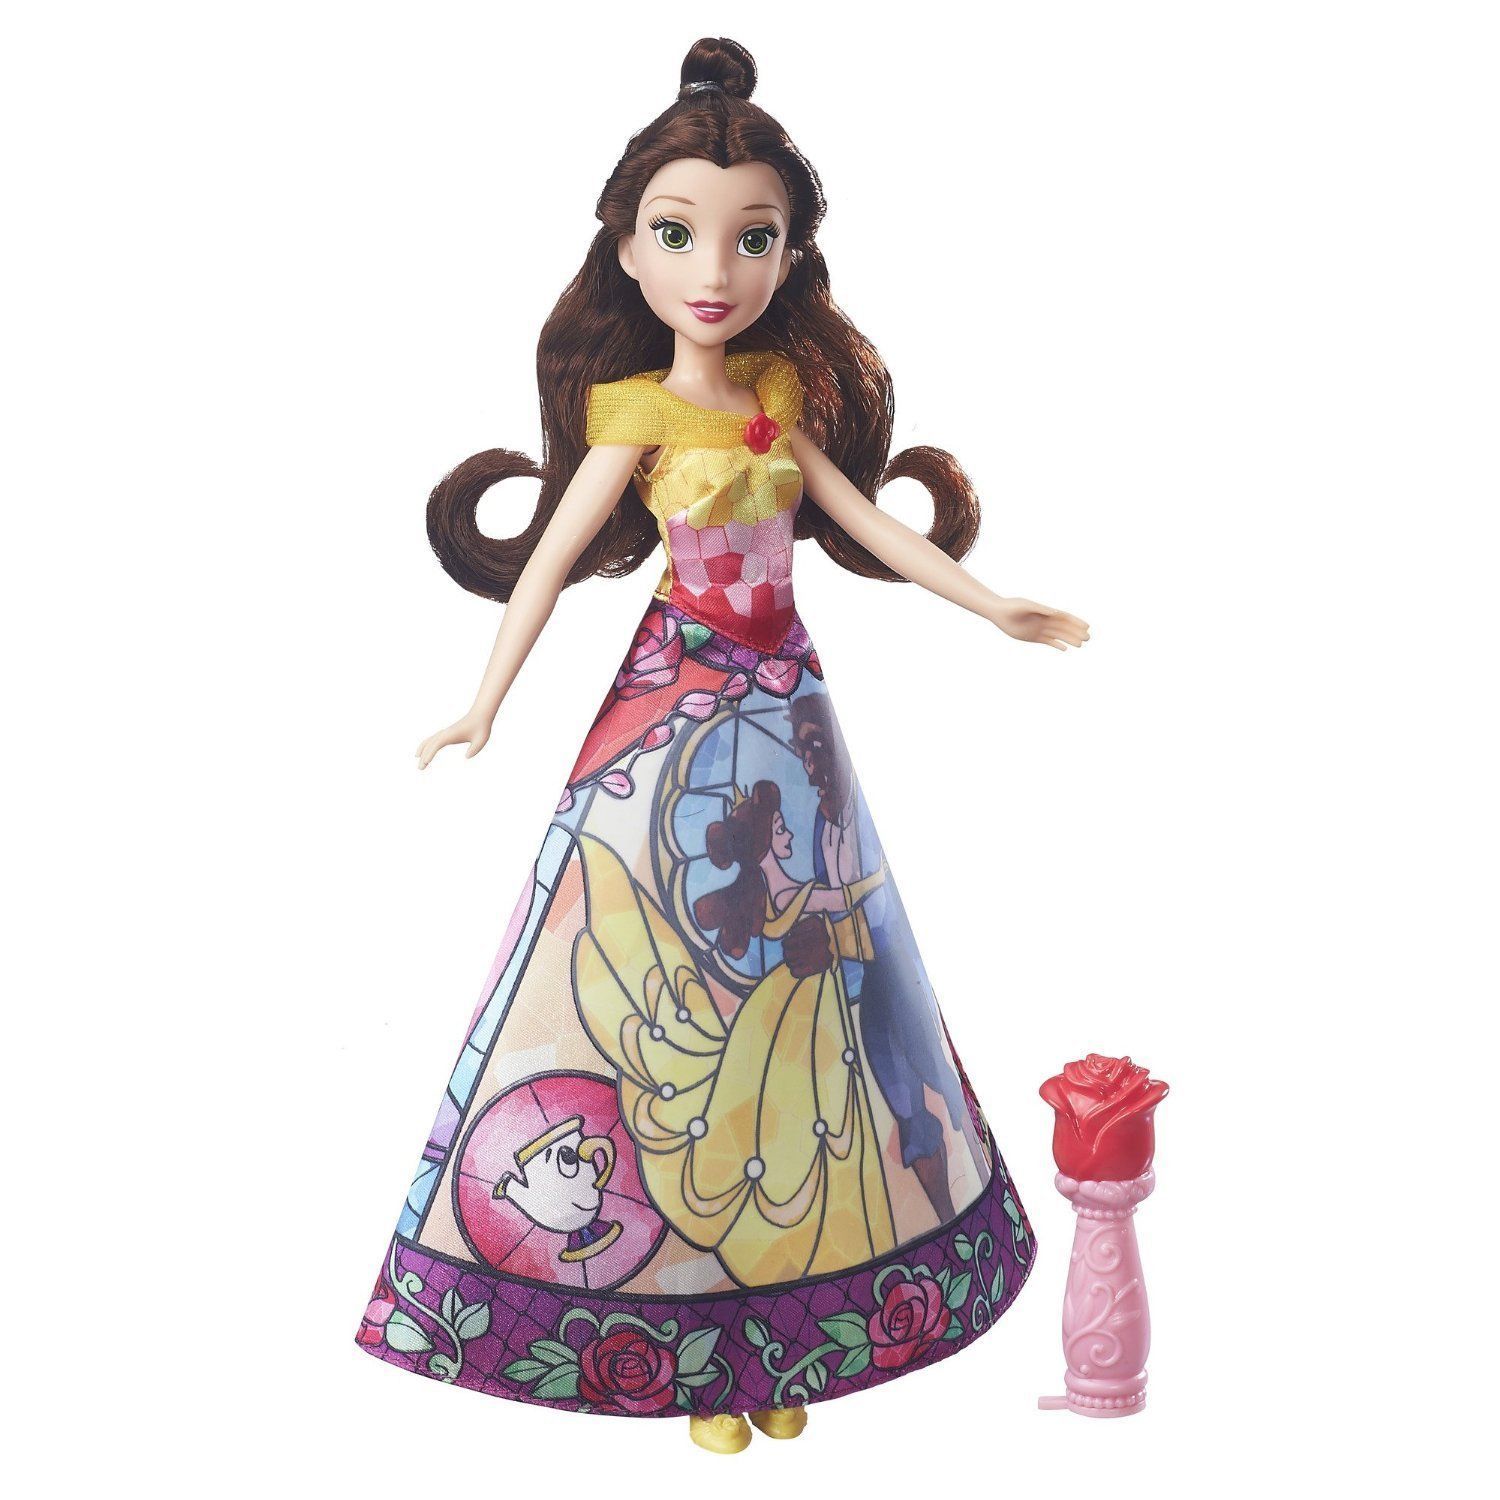 disney princess belle's magical story skirt doll in fuchsia/yellow by hasbro